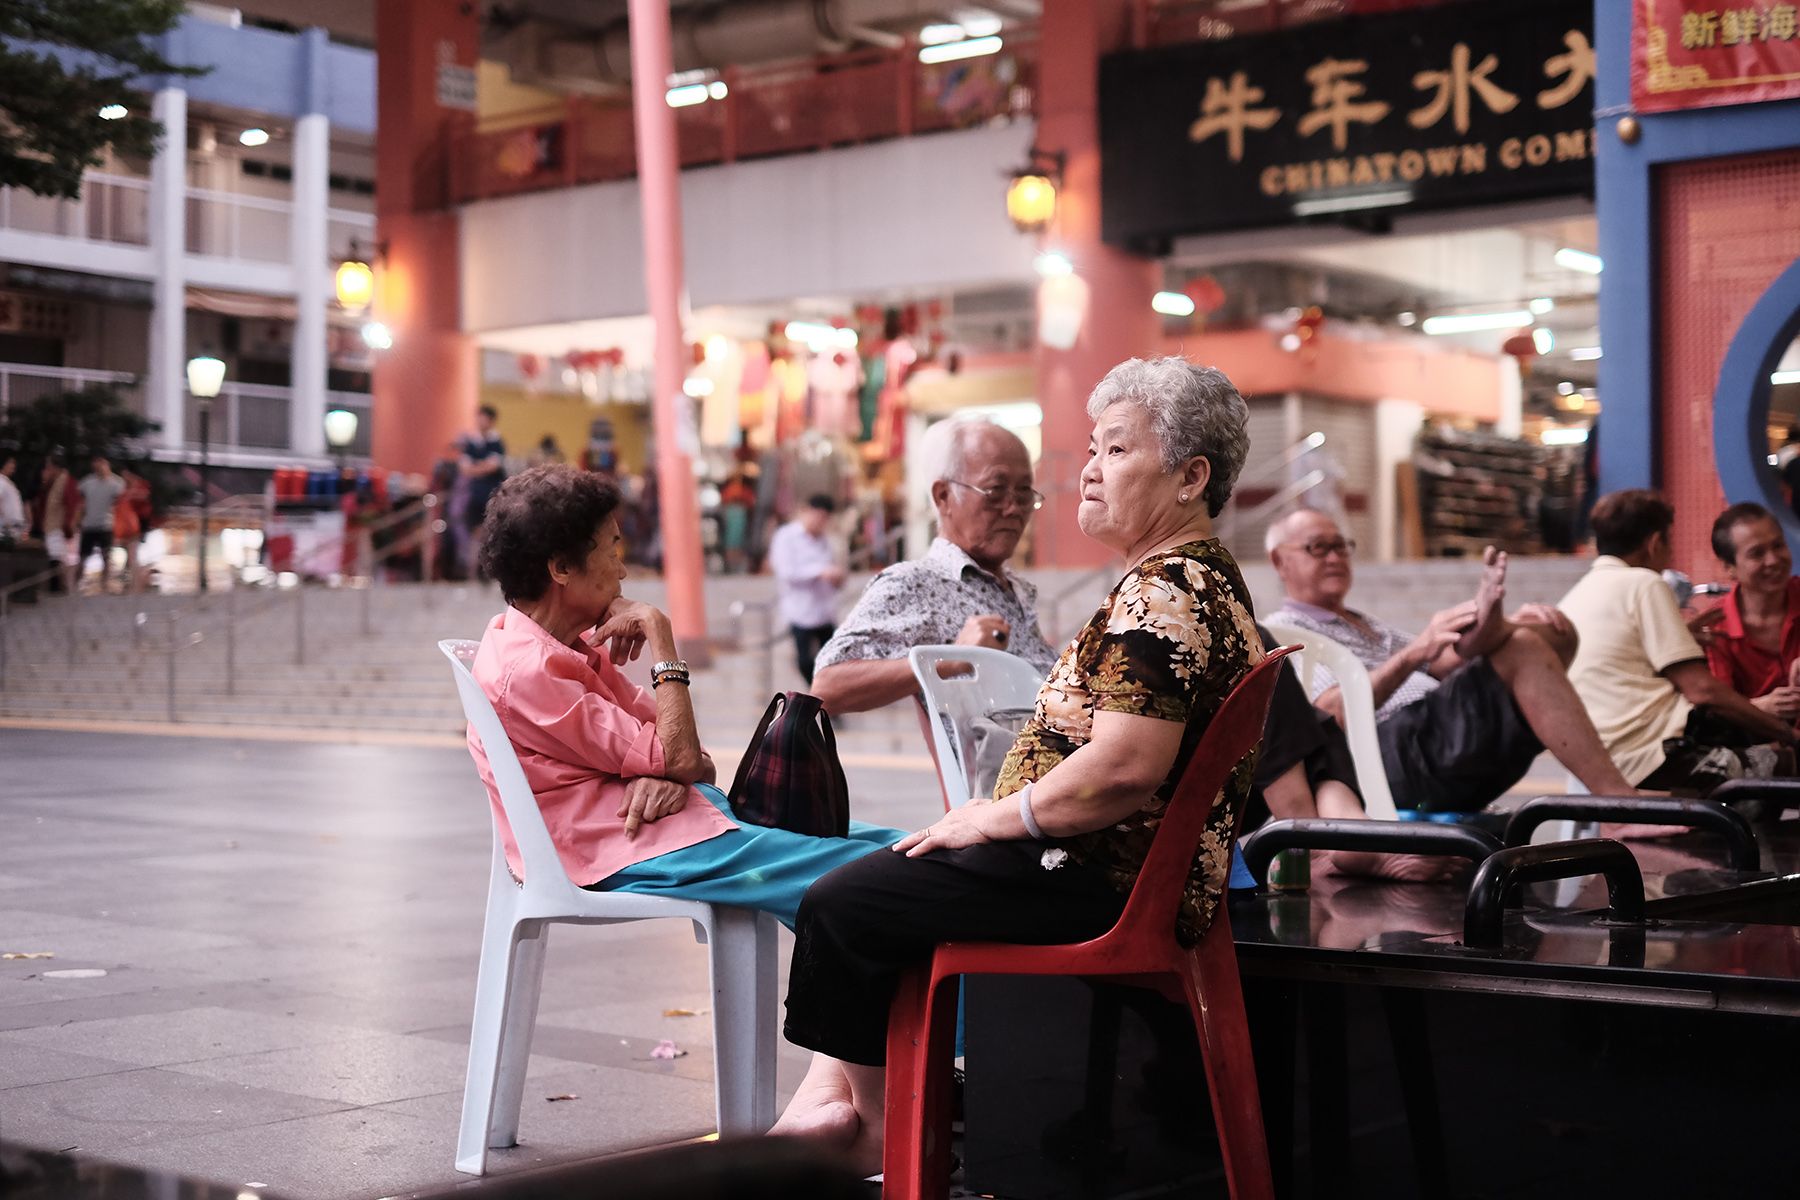 Retirees relaxing in Kreta Ayer Square in Singapore, a group of two women and two men

